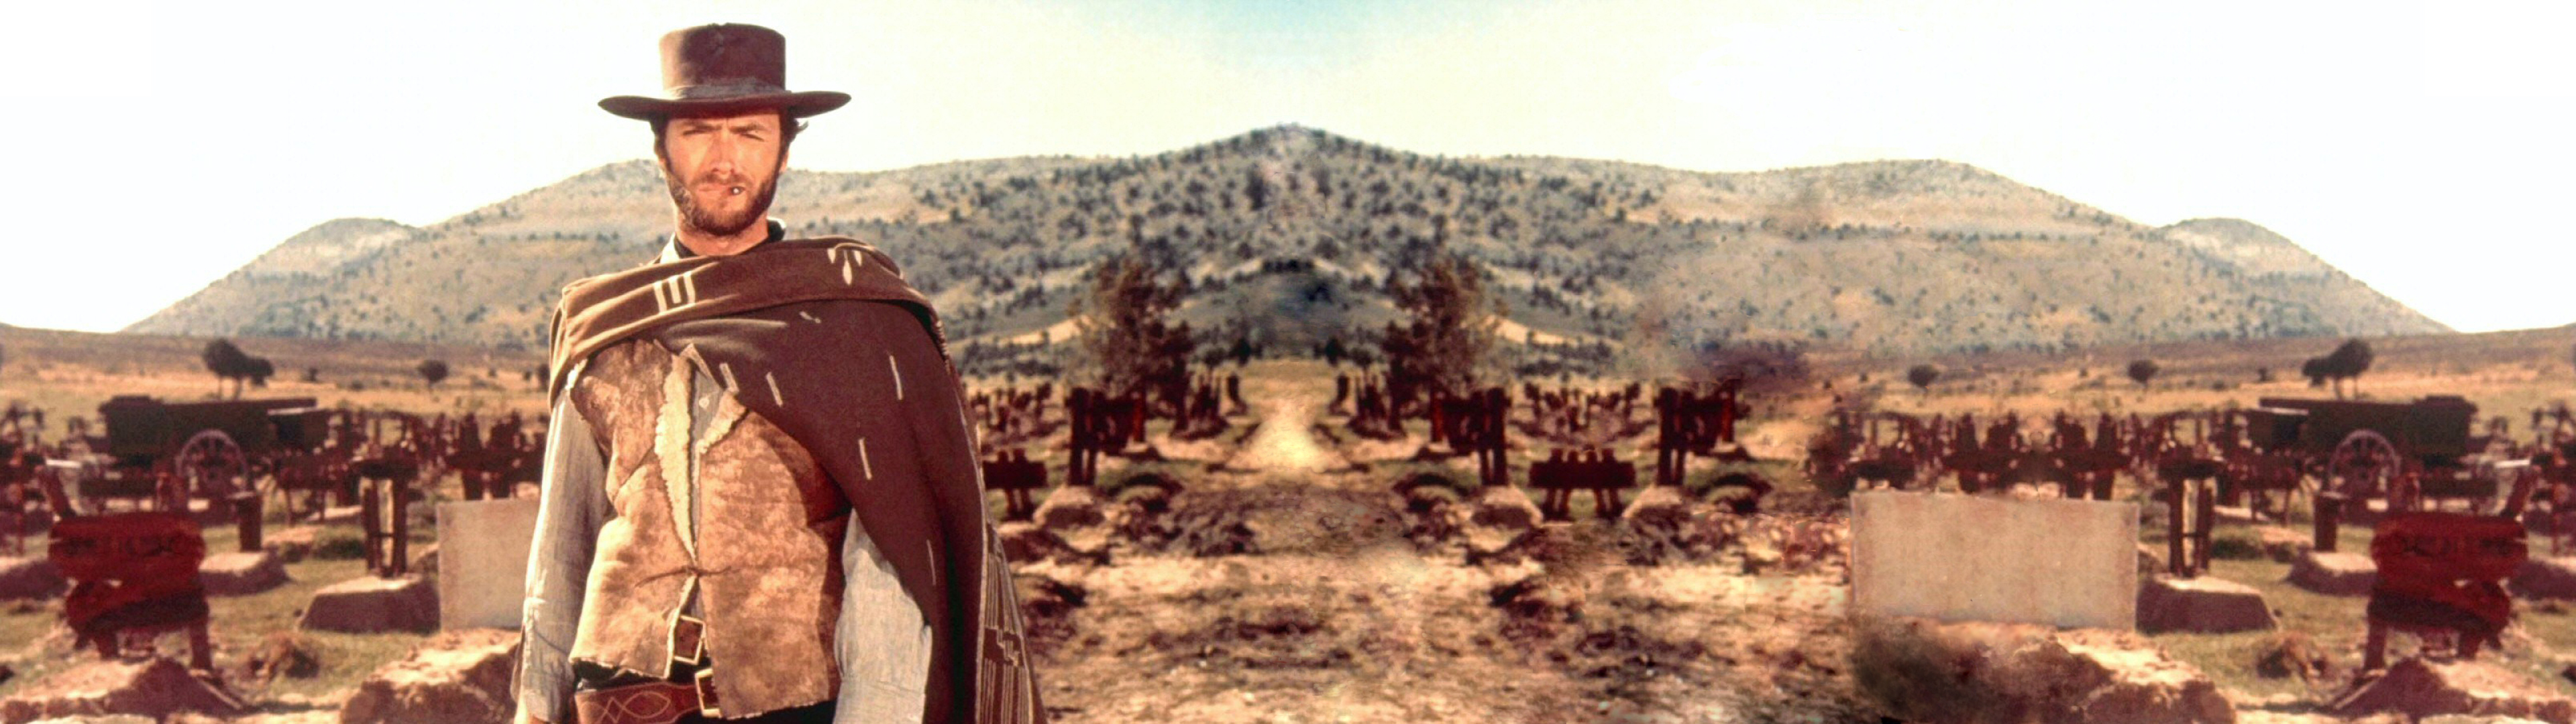 the, Good, The, Bad, And, The, Ugly, Western, Clint, Eastwood, Multi, Dual Wallpaper